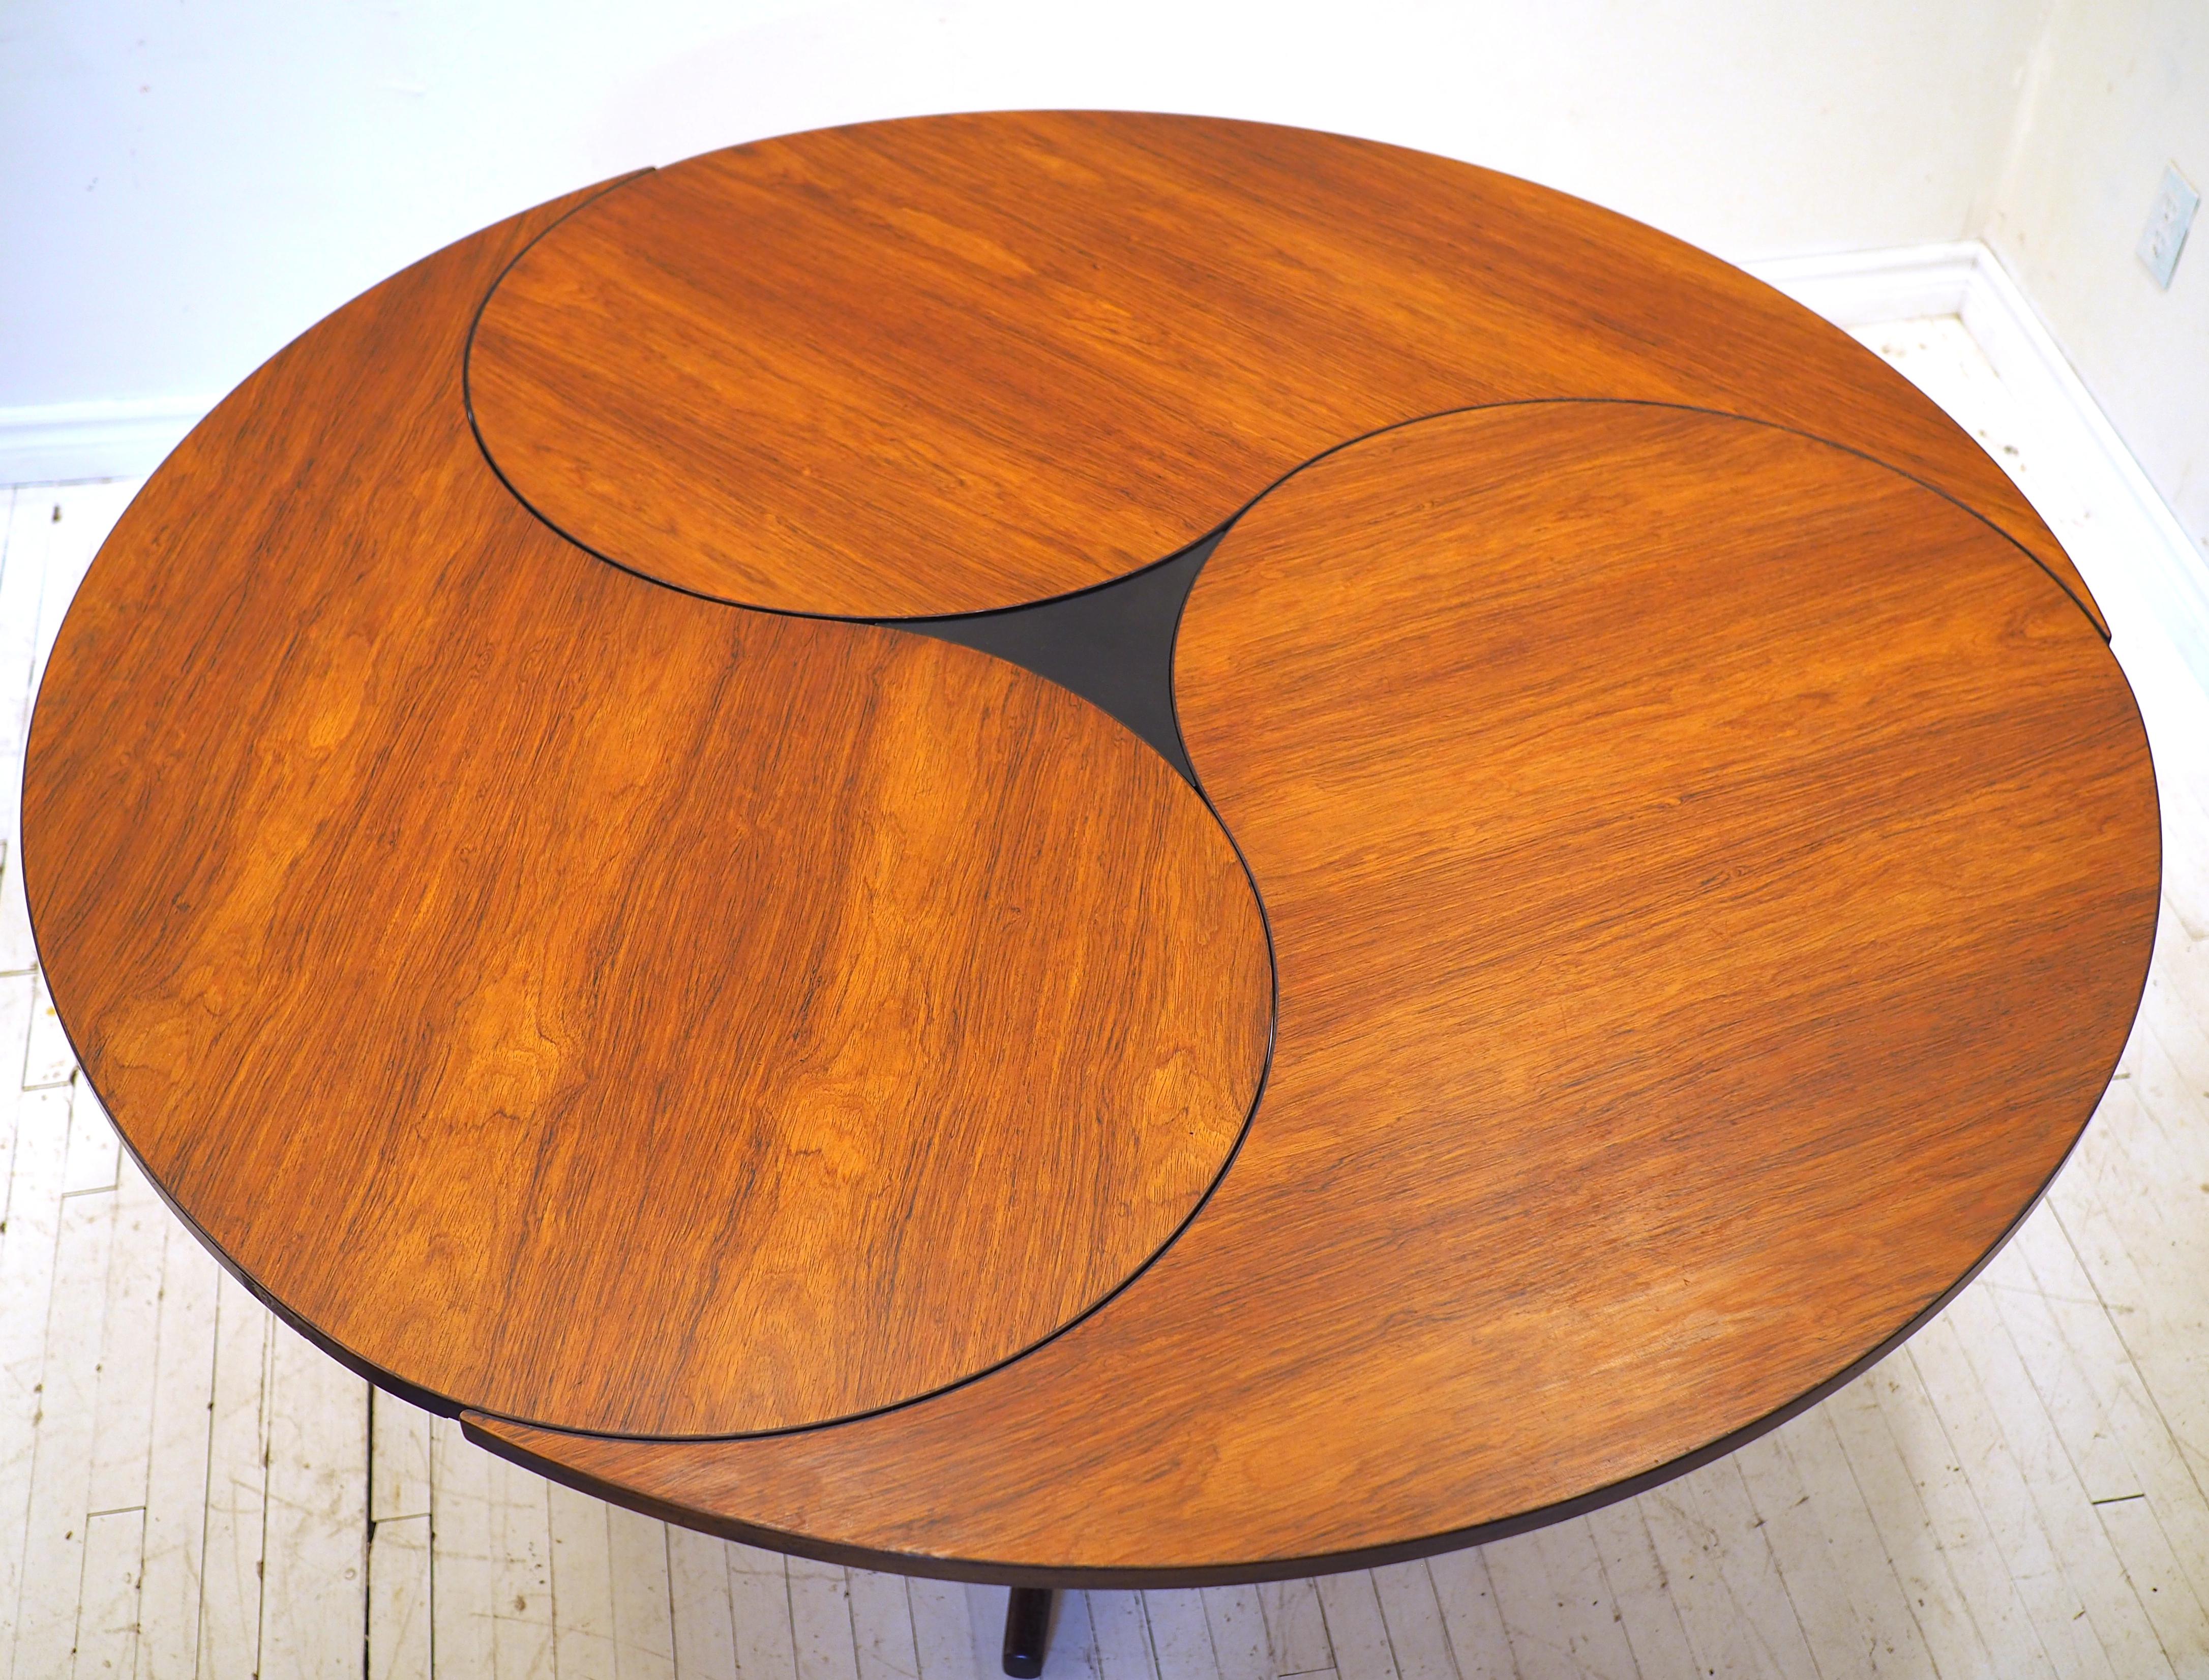 Yin Yang Table designed by Ole Gjerlov and Torbin Lind for France and Son, circa 1960s. Rosewood leaves, formica centre insert, and solid wenge wood base. An exceptionally rare item, especially in the rosewood variant. 

The table top consists of